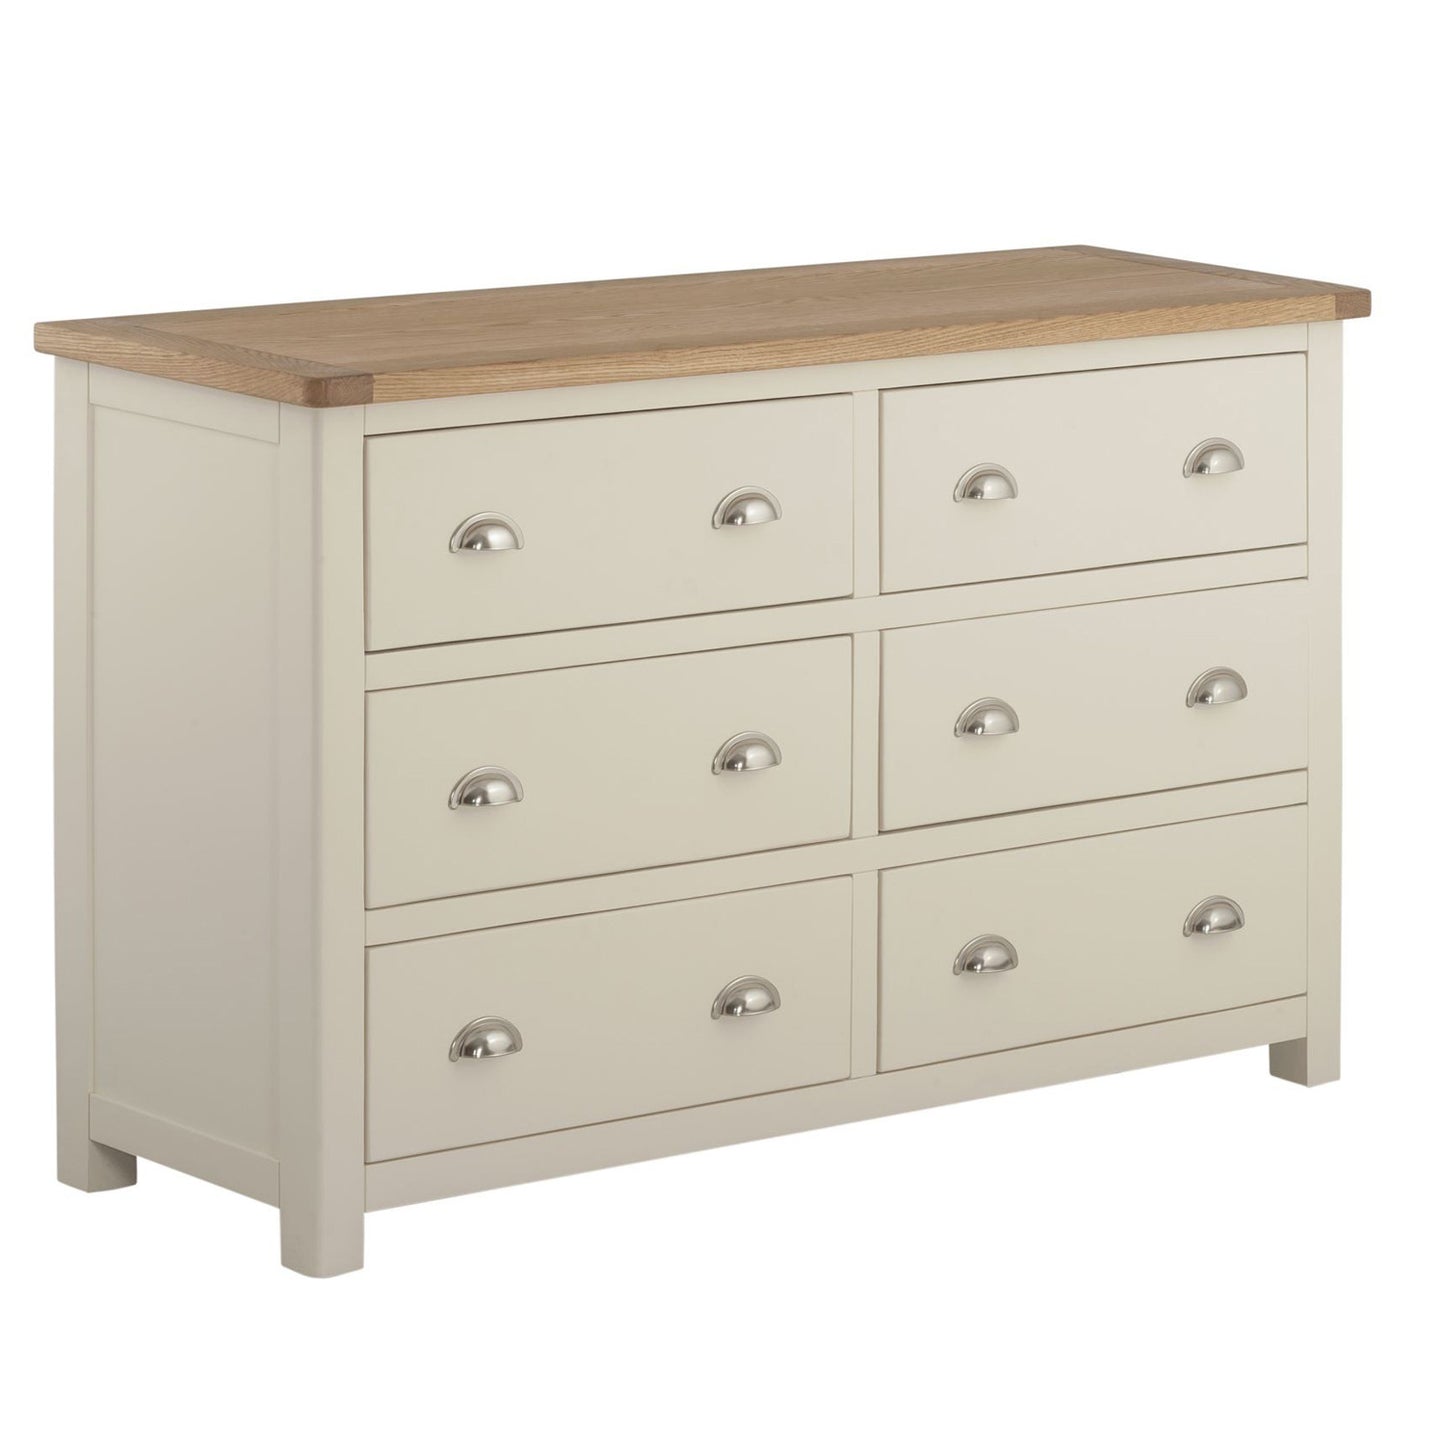 Todenham Cream Painted & Oak Chest of Drawers - 6 Drawer Wide Chest